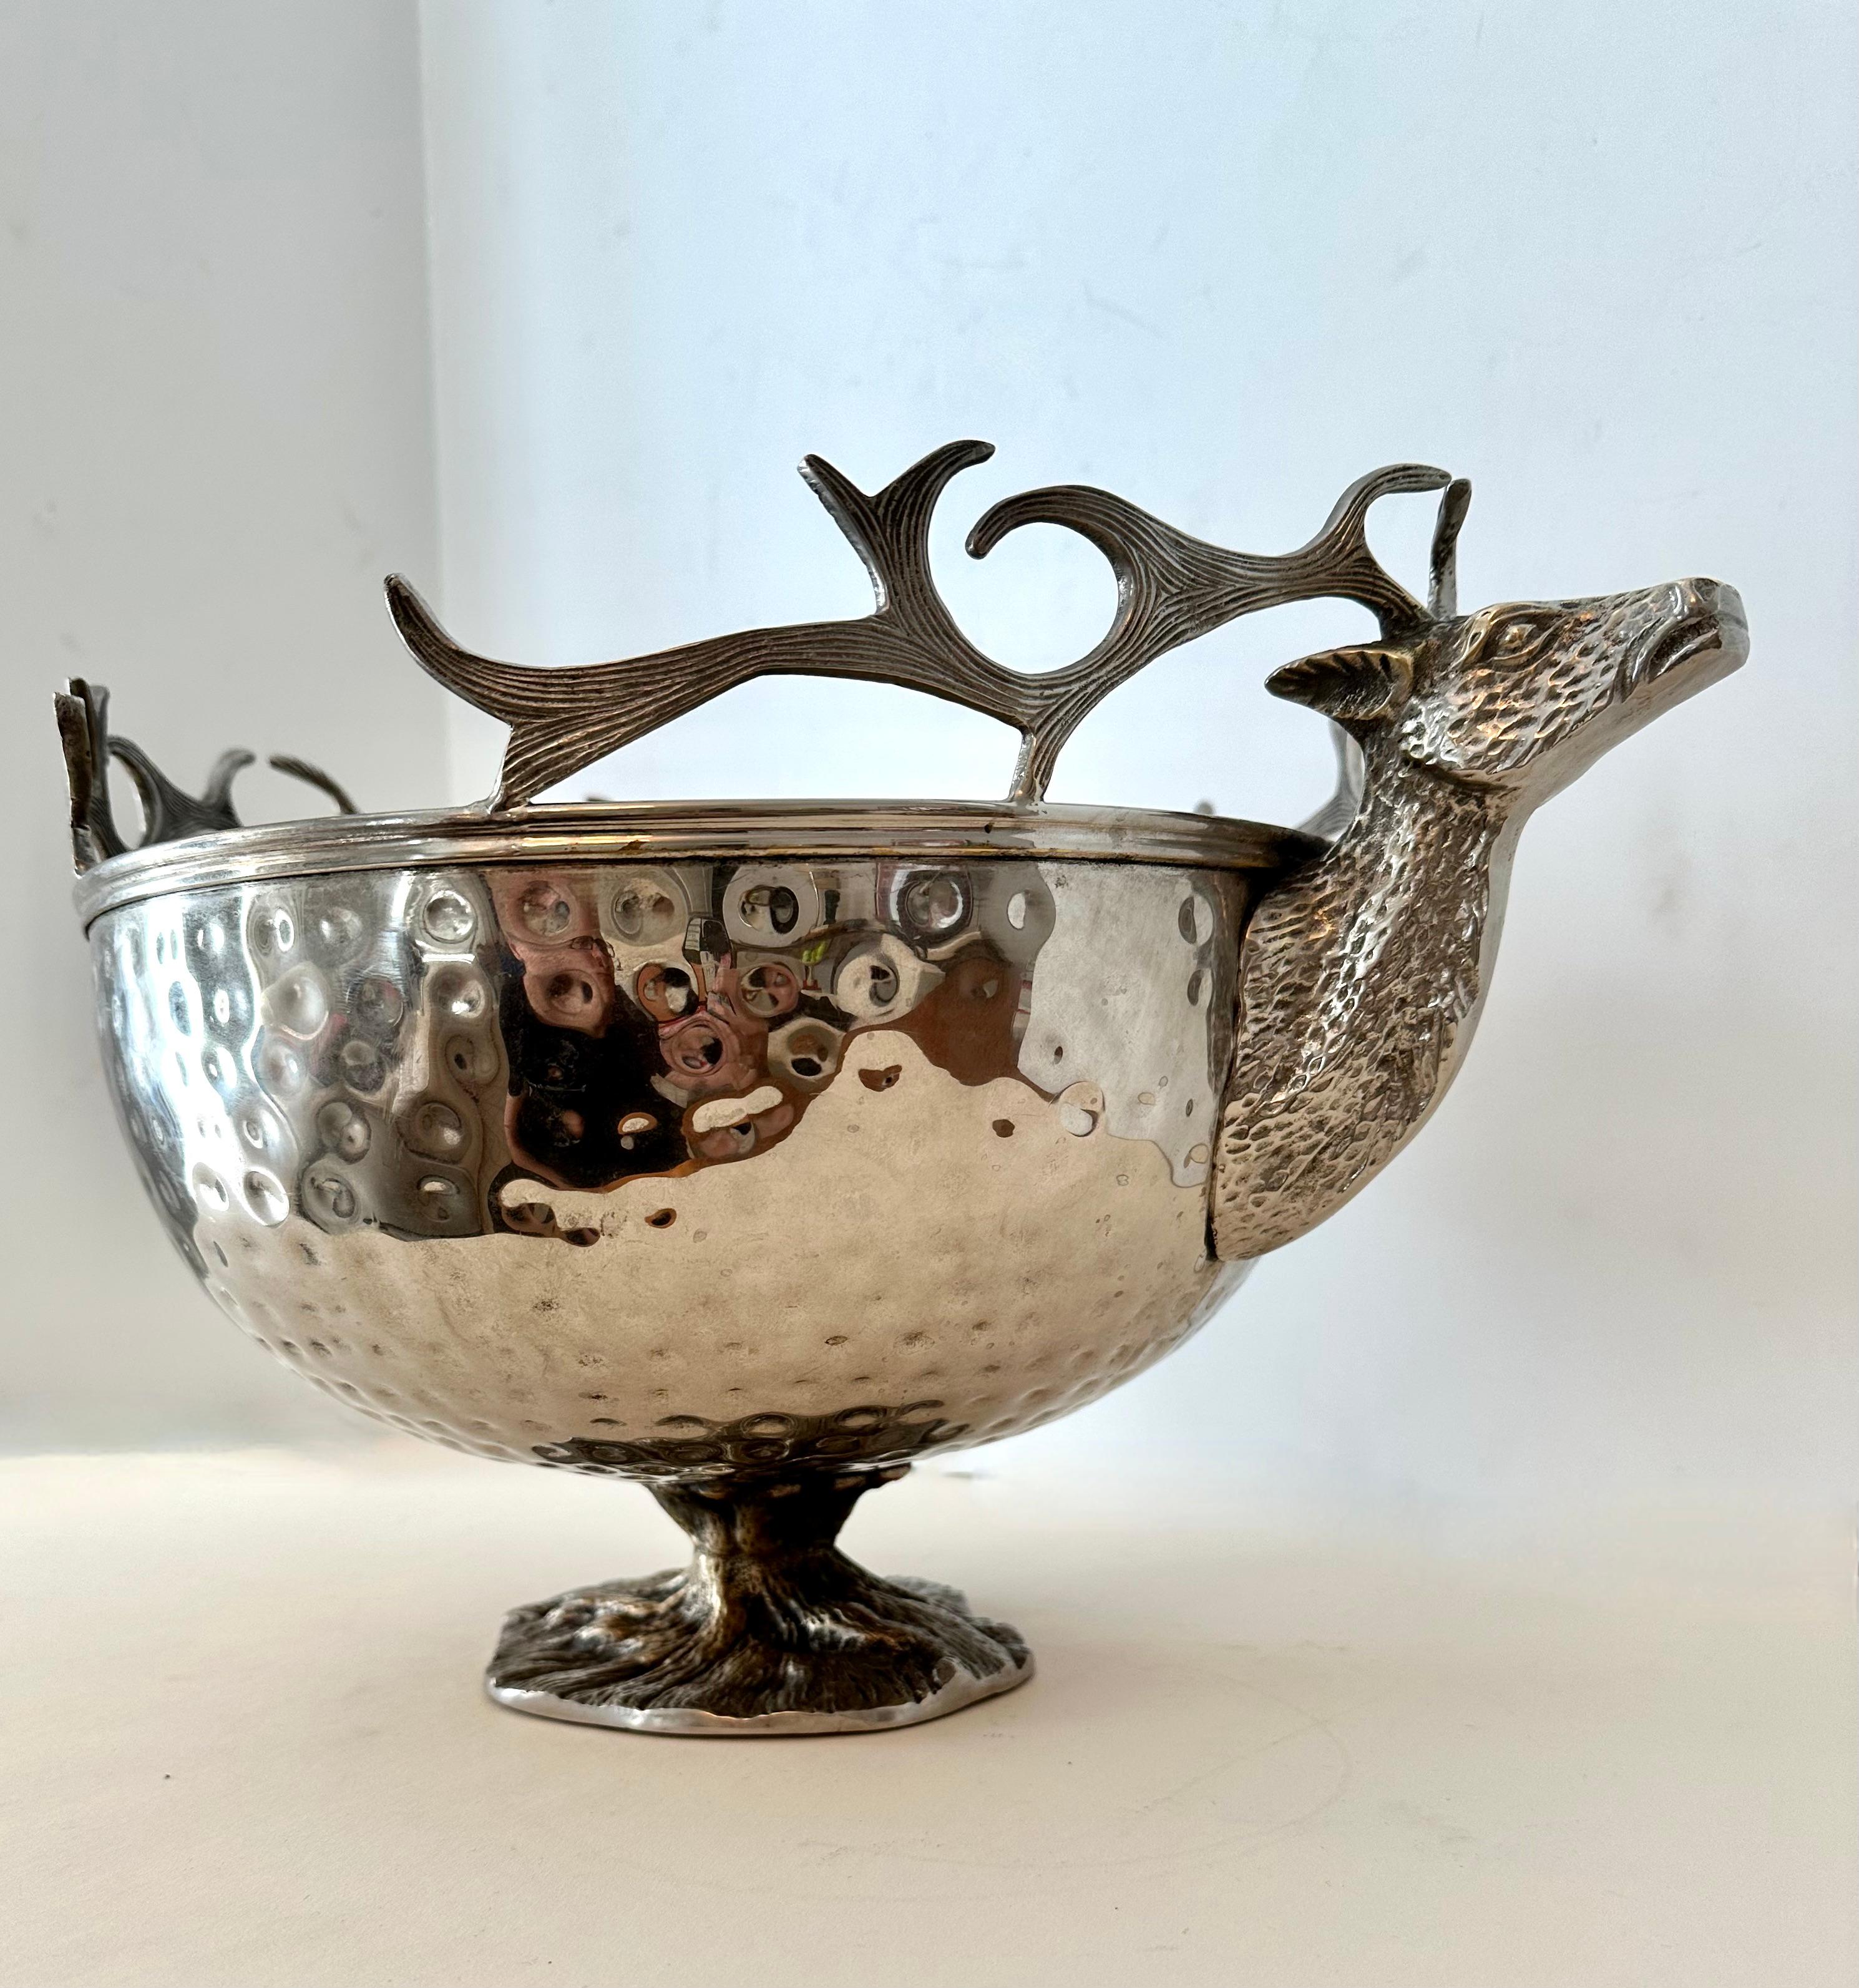 A large silver plate hammered footed bowl with Stag heads for handles. The bowl is in great condition, the stag heads are well designed and have nice detailing - the footed portion is unique as it has the look of an intricate grown tree base.

A